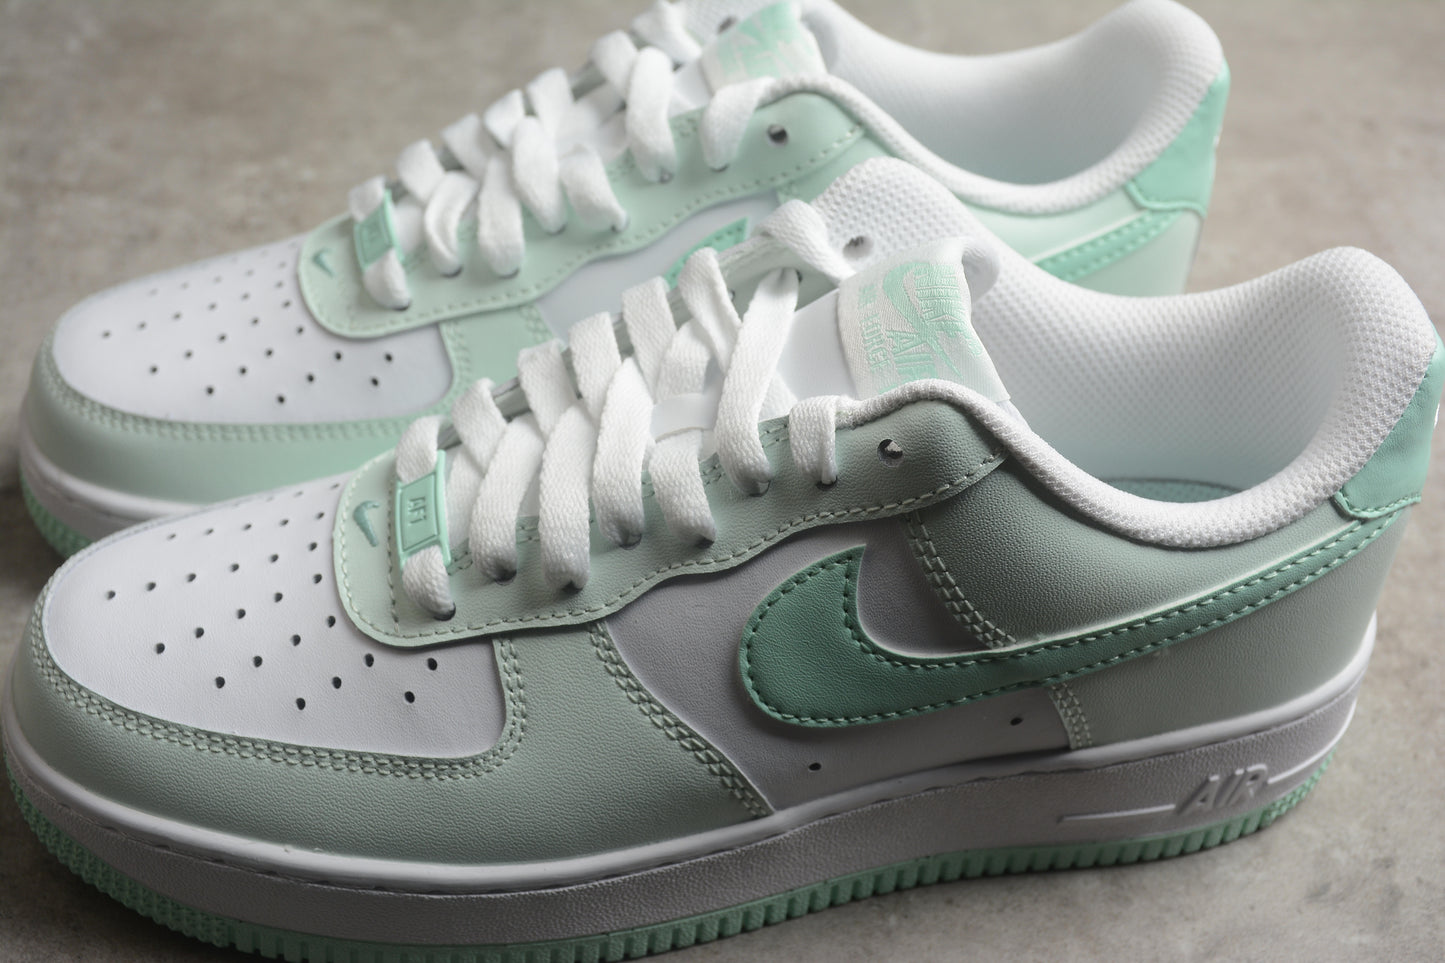 Air Force 1 mint white core